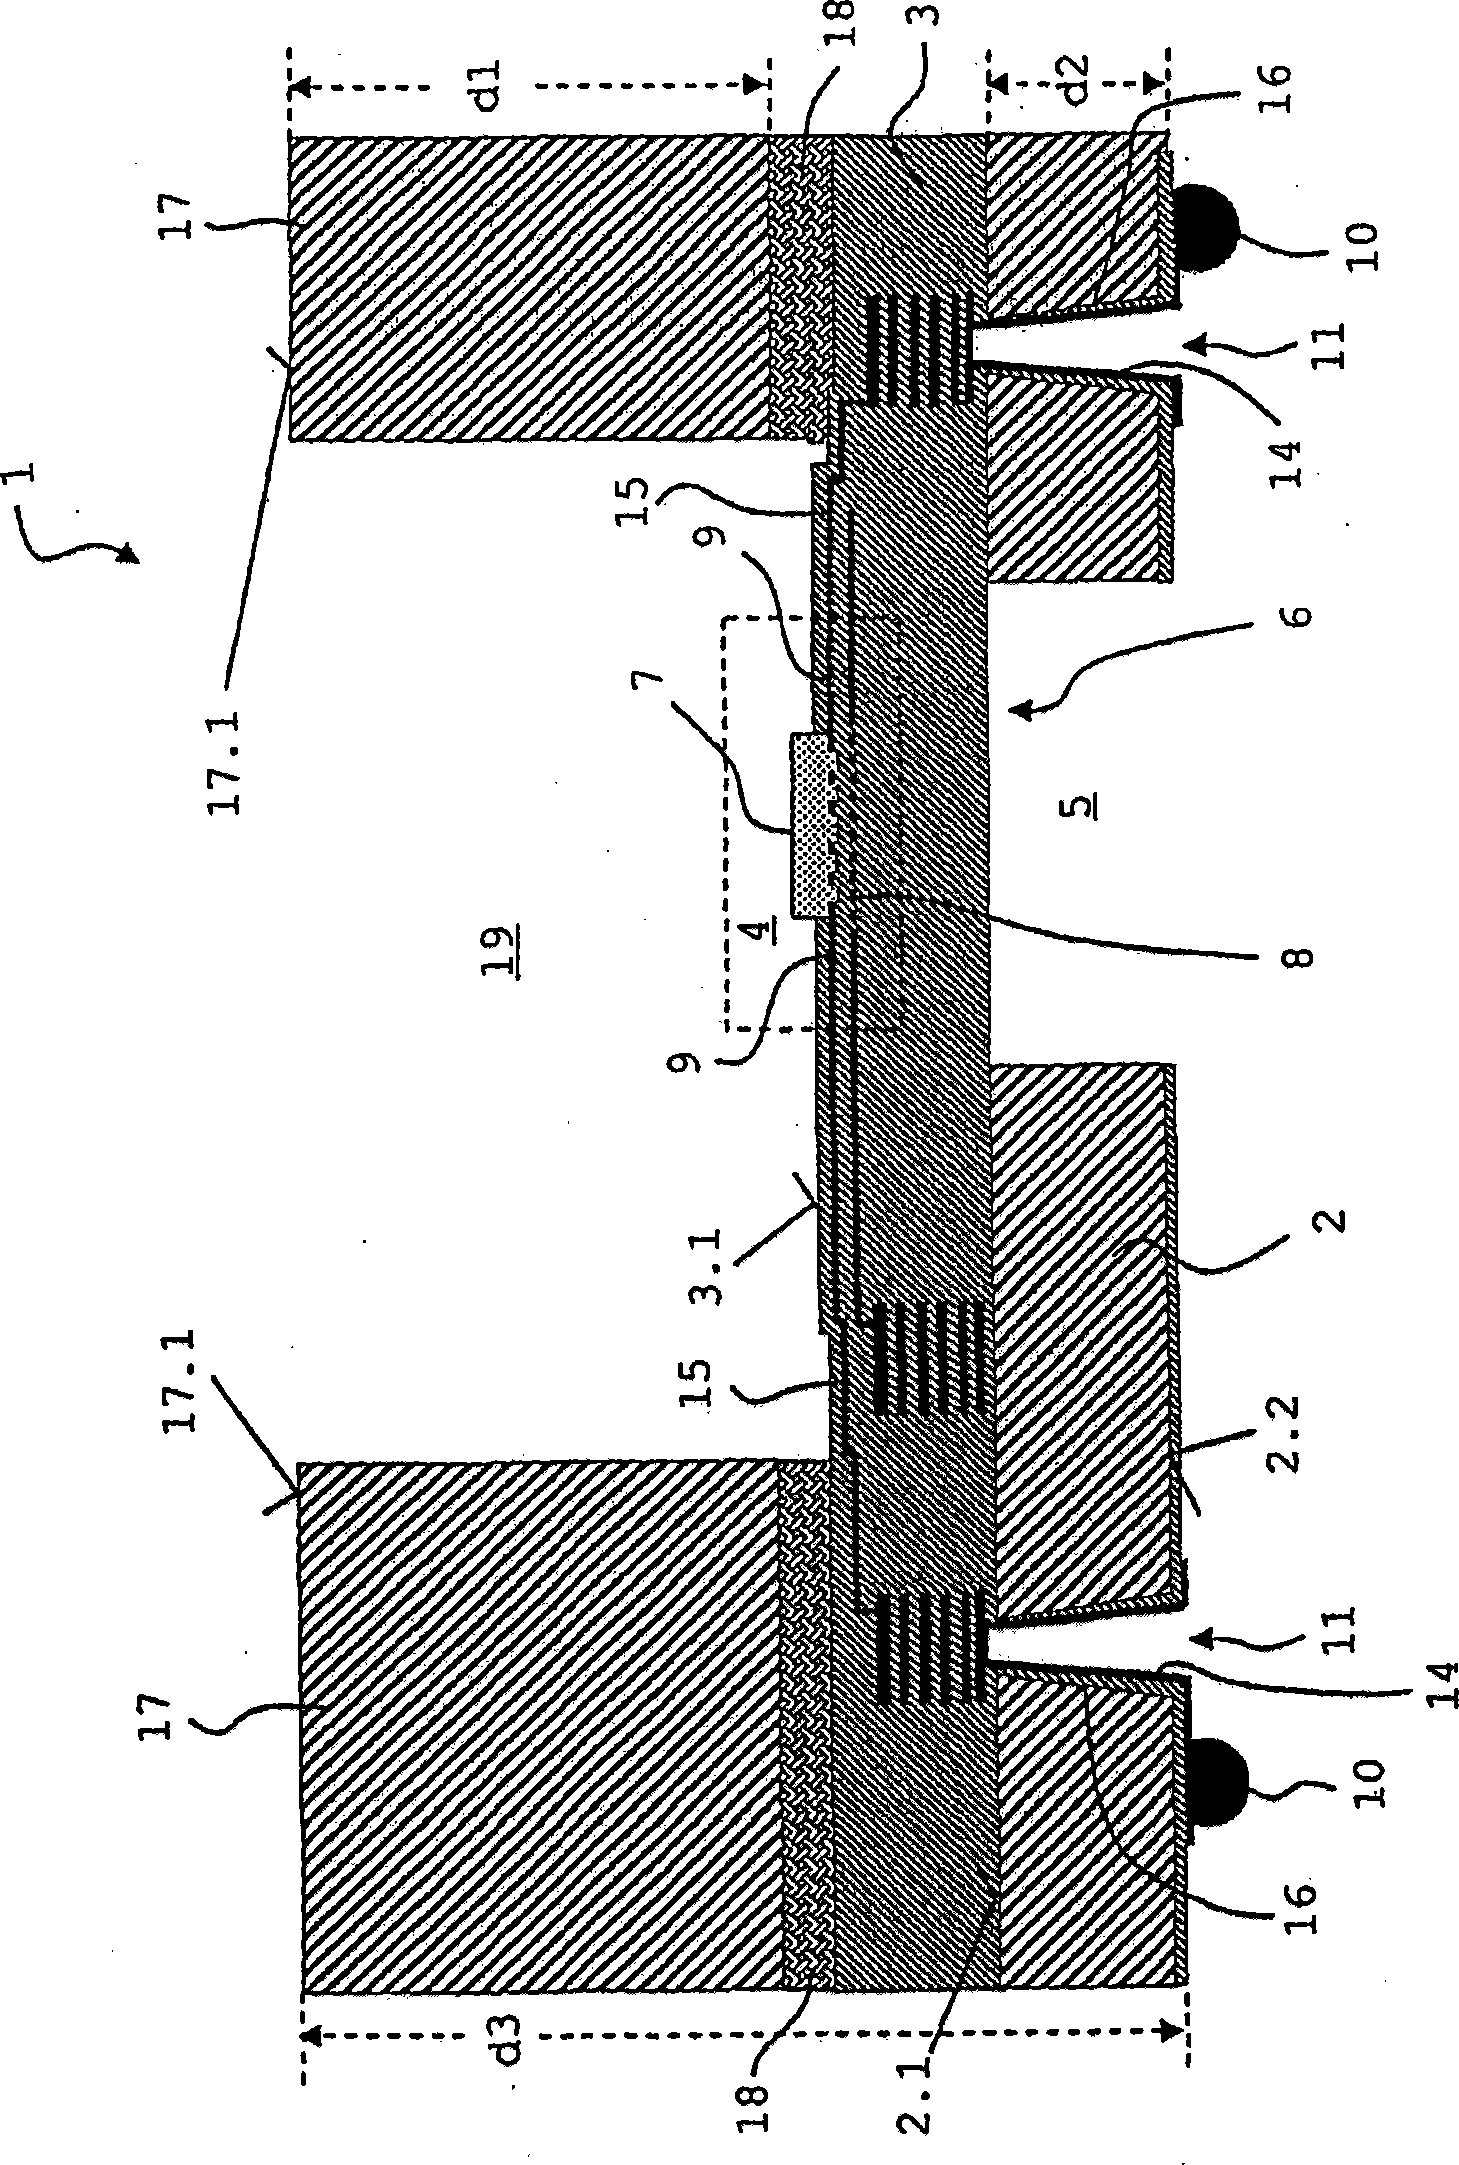 Chemical sensor and method for manufacturing such a chemical sensor